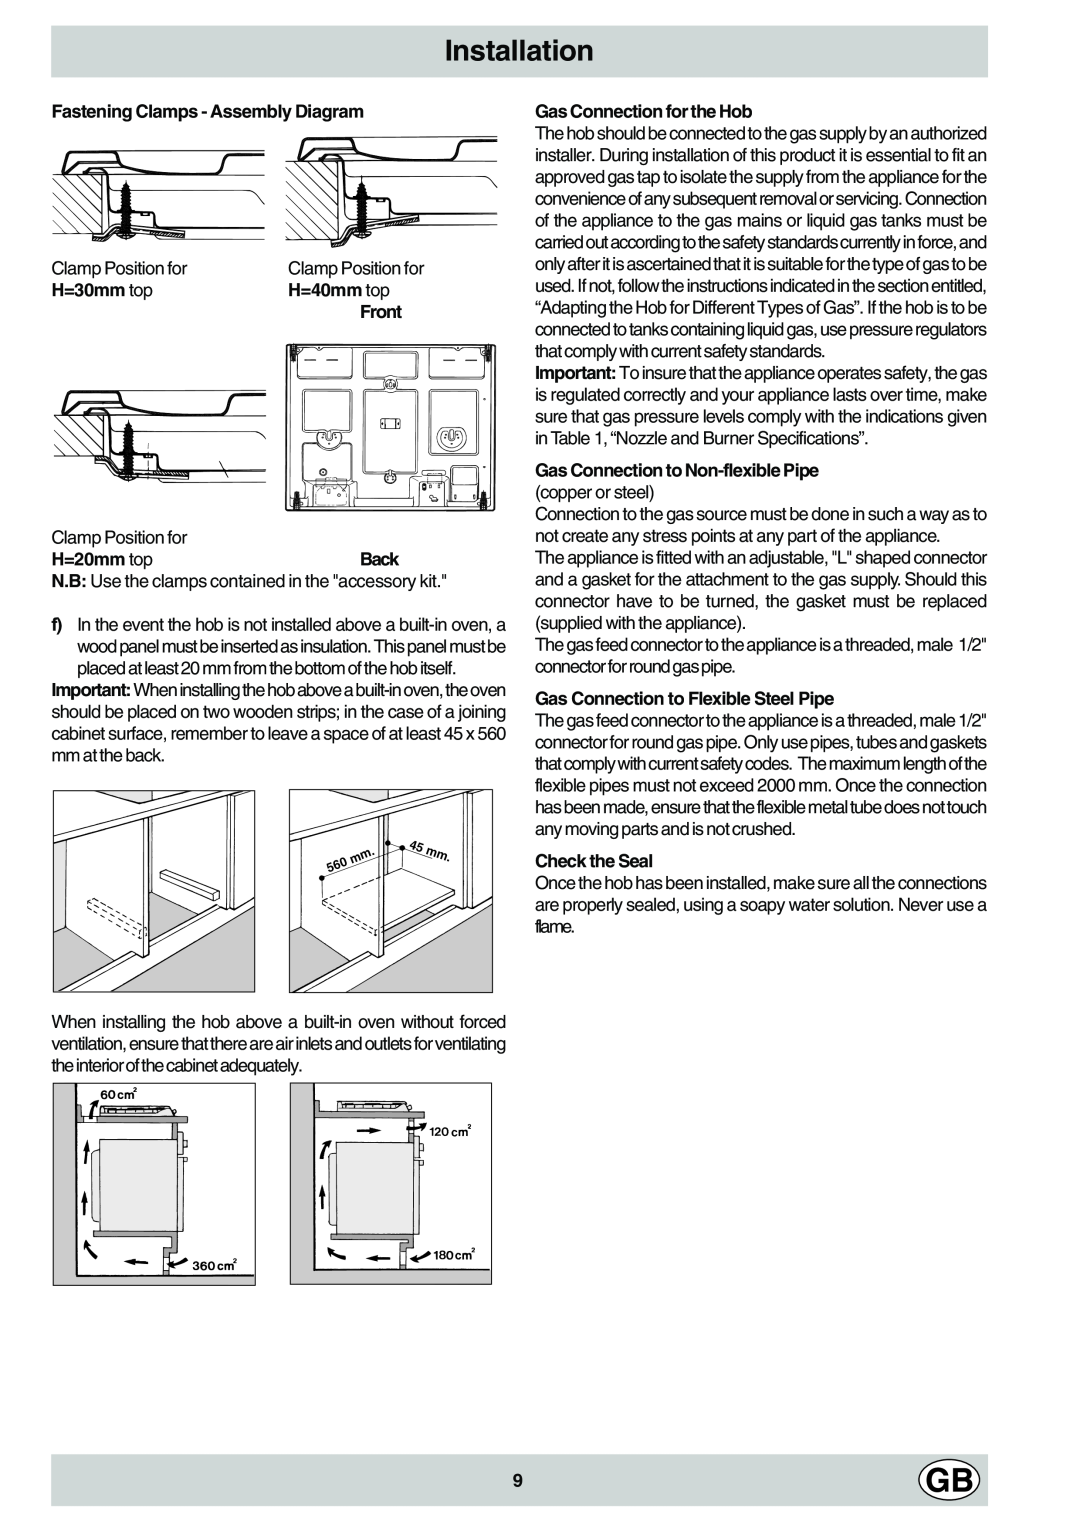 Hotpoint GF640, GF641 manual Installation, Fastening Clamps - Assembly Diagram 